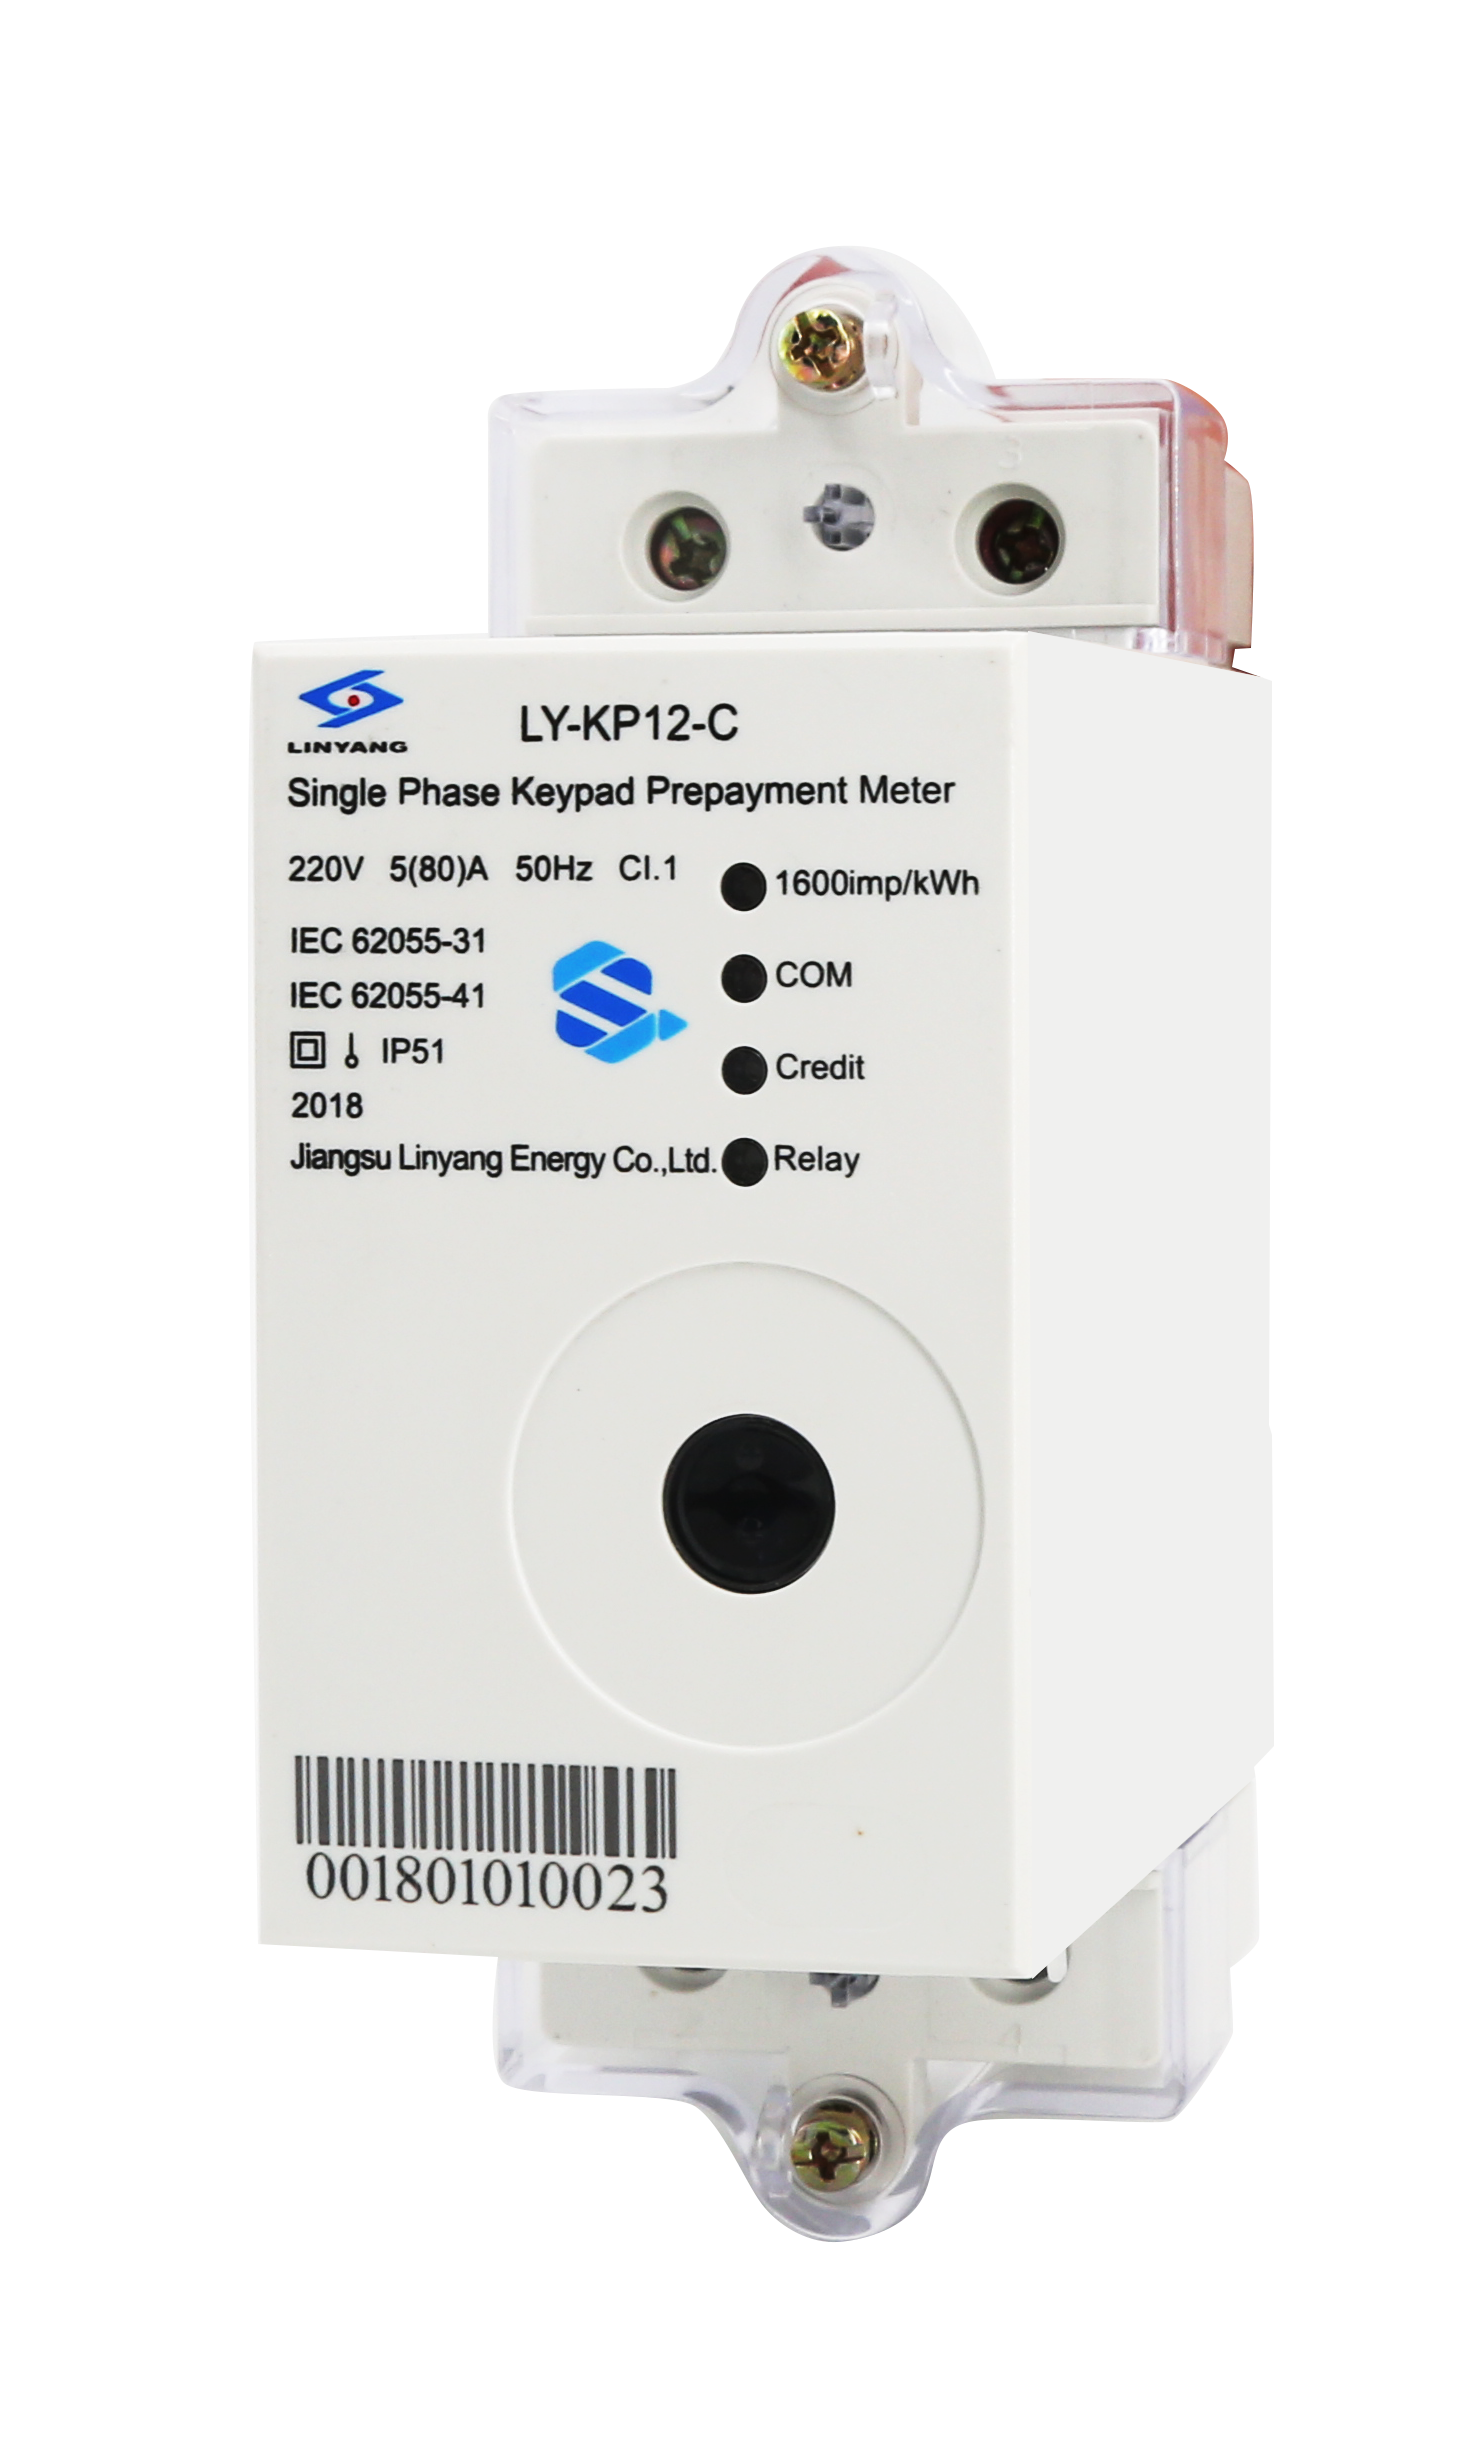 China LINYANG SPLIT-TYPE SINGLE-PHASE DIN RAIL MOUNTING KEYPAD PREPAYMENT ENERGY METER factory and suppliers | Linyang Featured Image